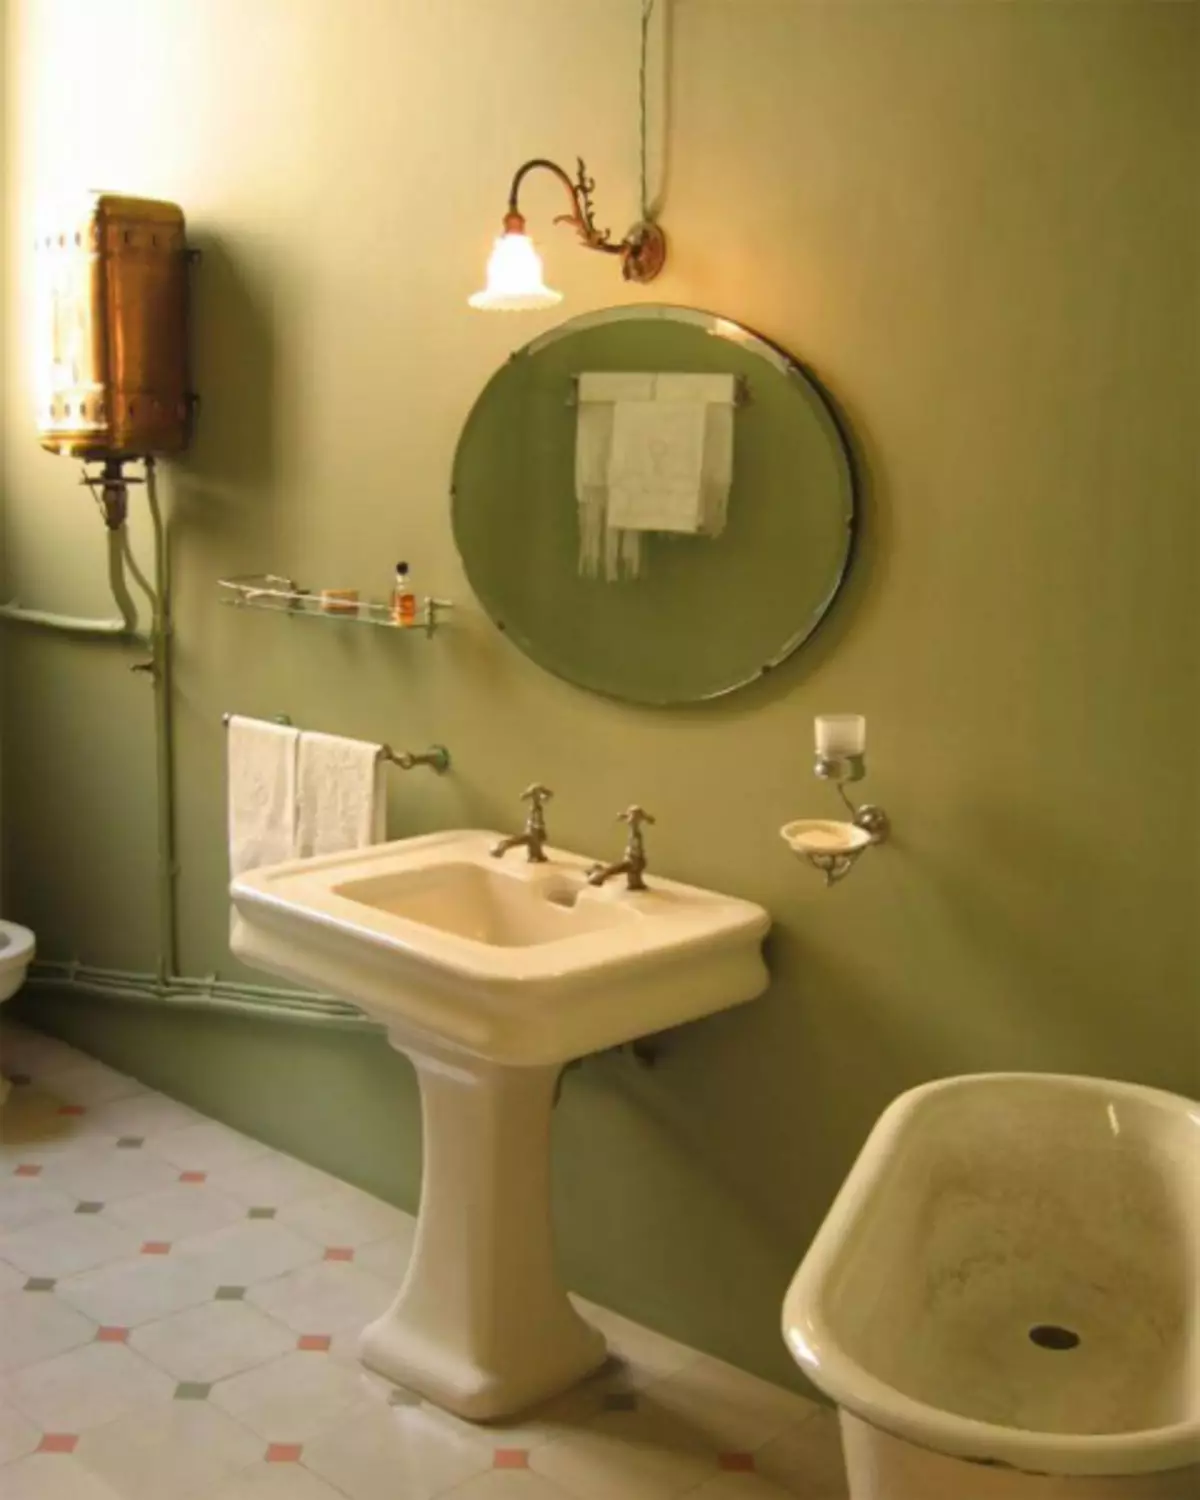 How to paint the walls in the bathroom instead of tile and how to update the cast-iron font